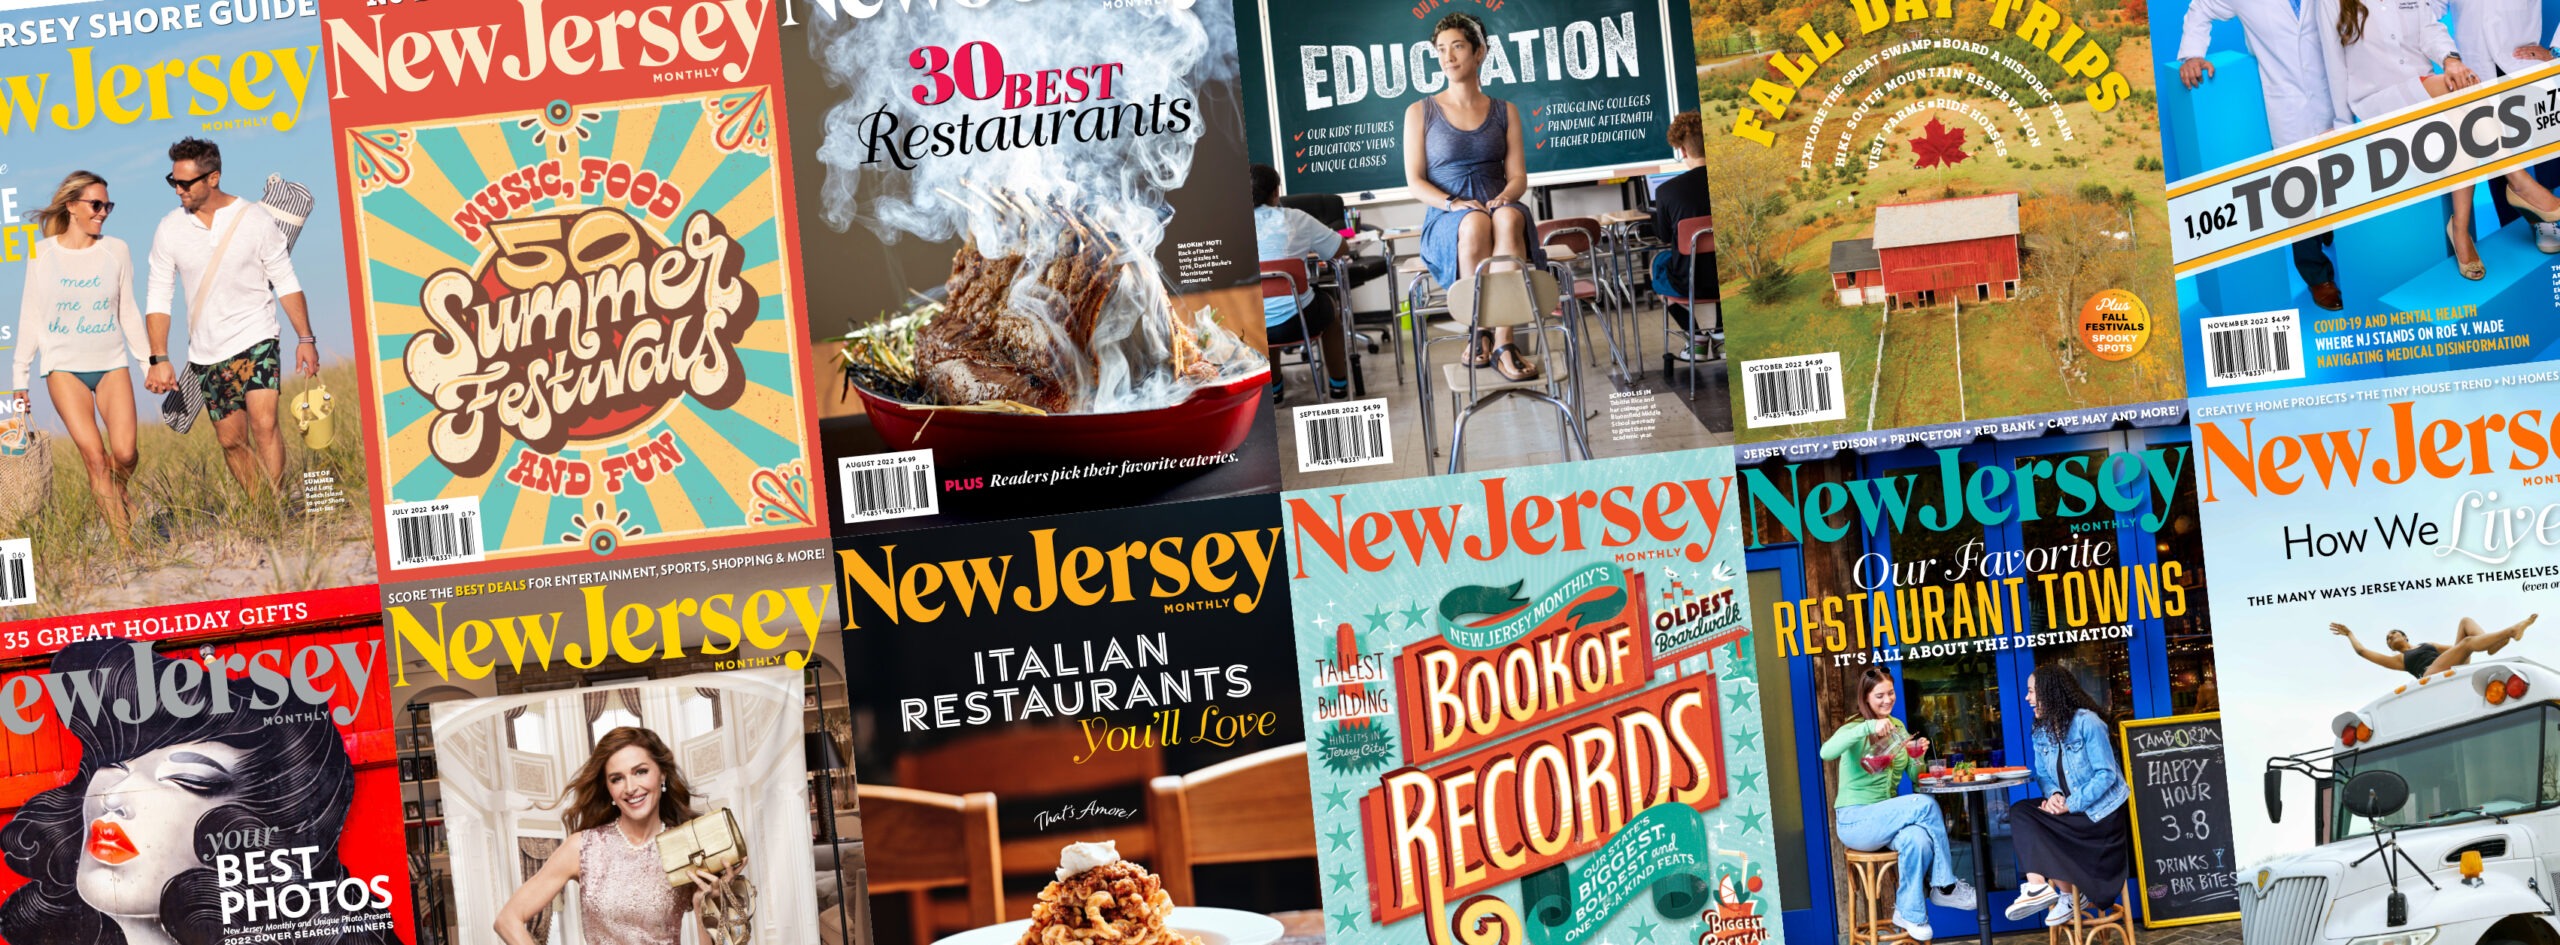 Collage of 2022 and 2023 covers of New Jersey Monthly